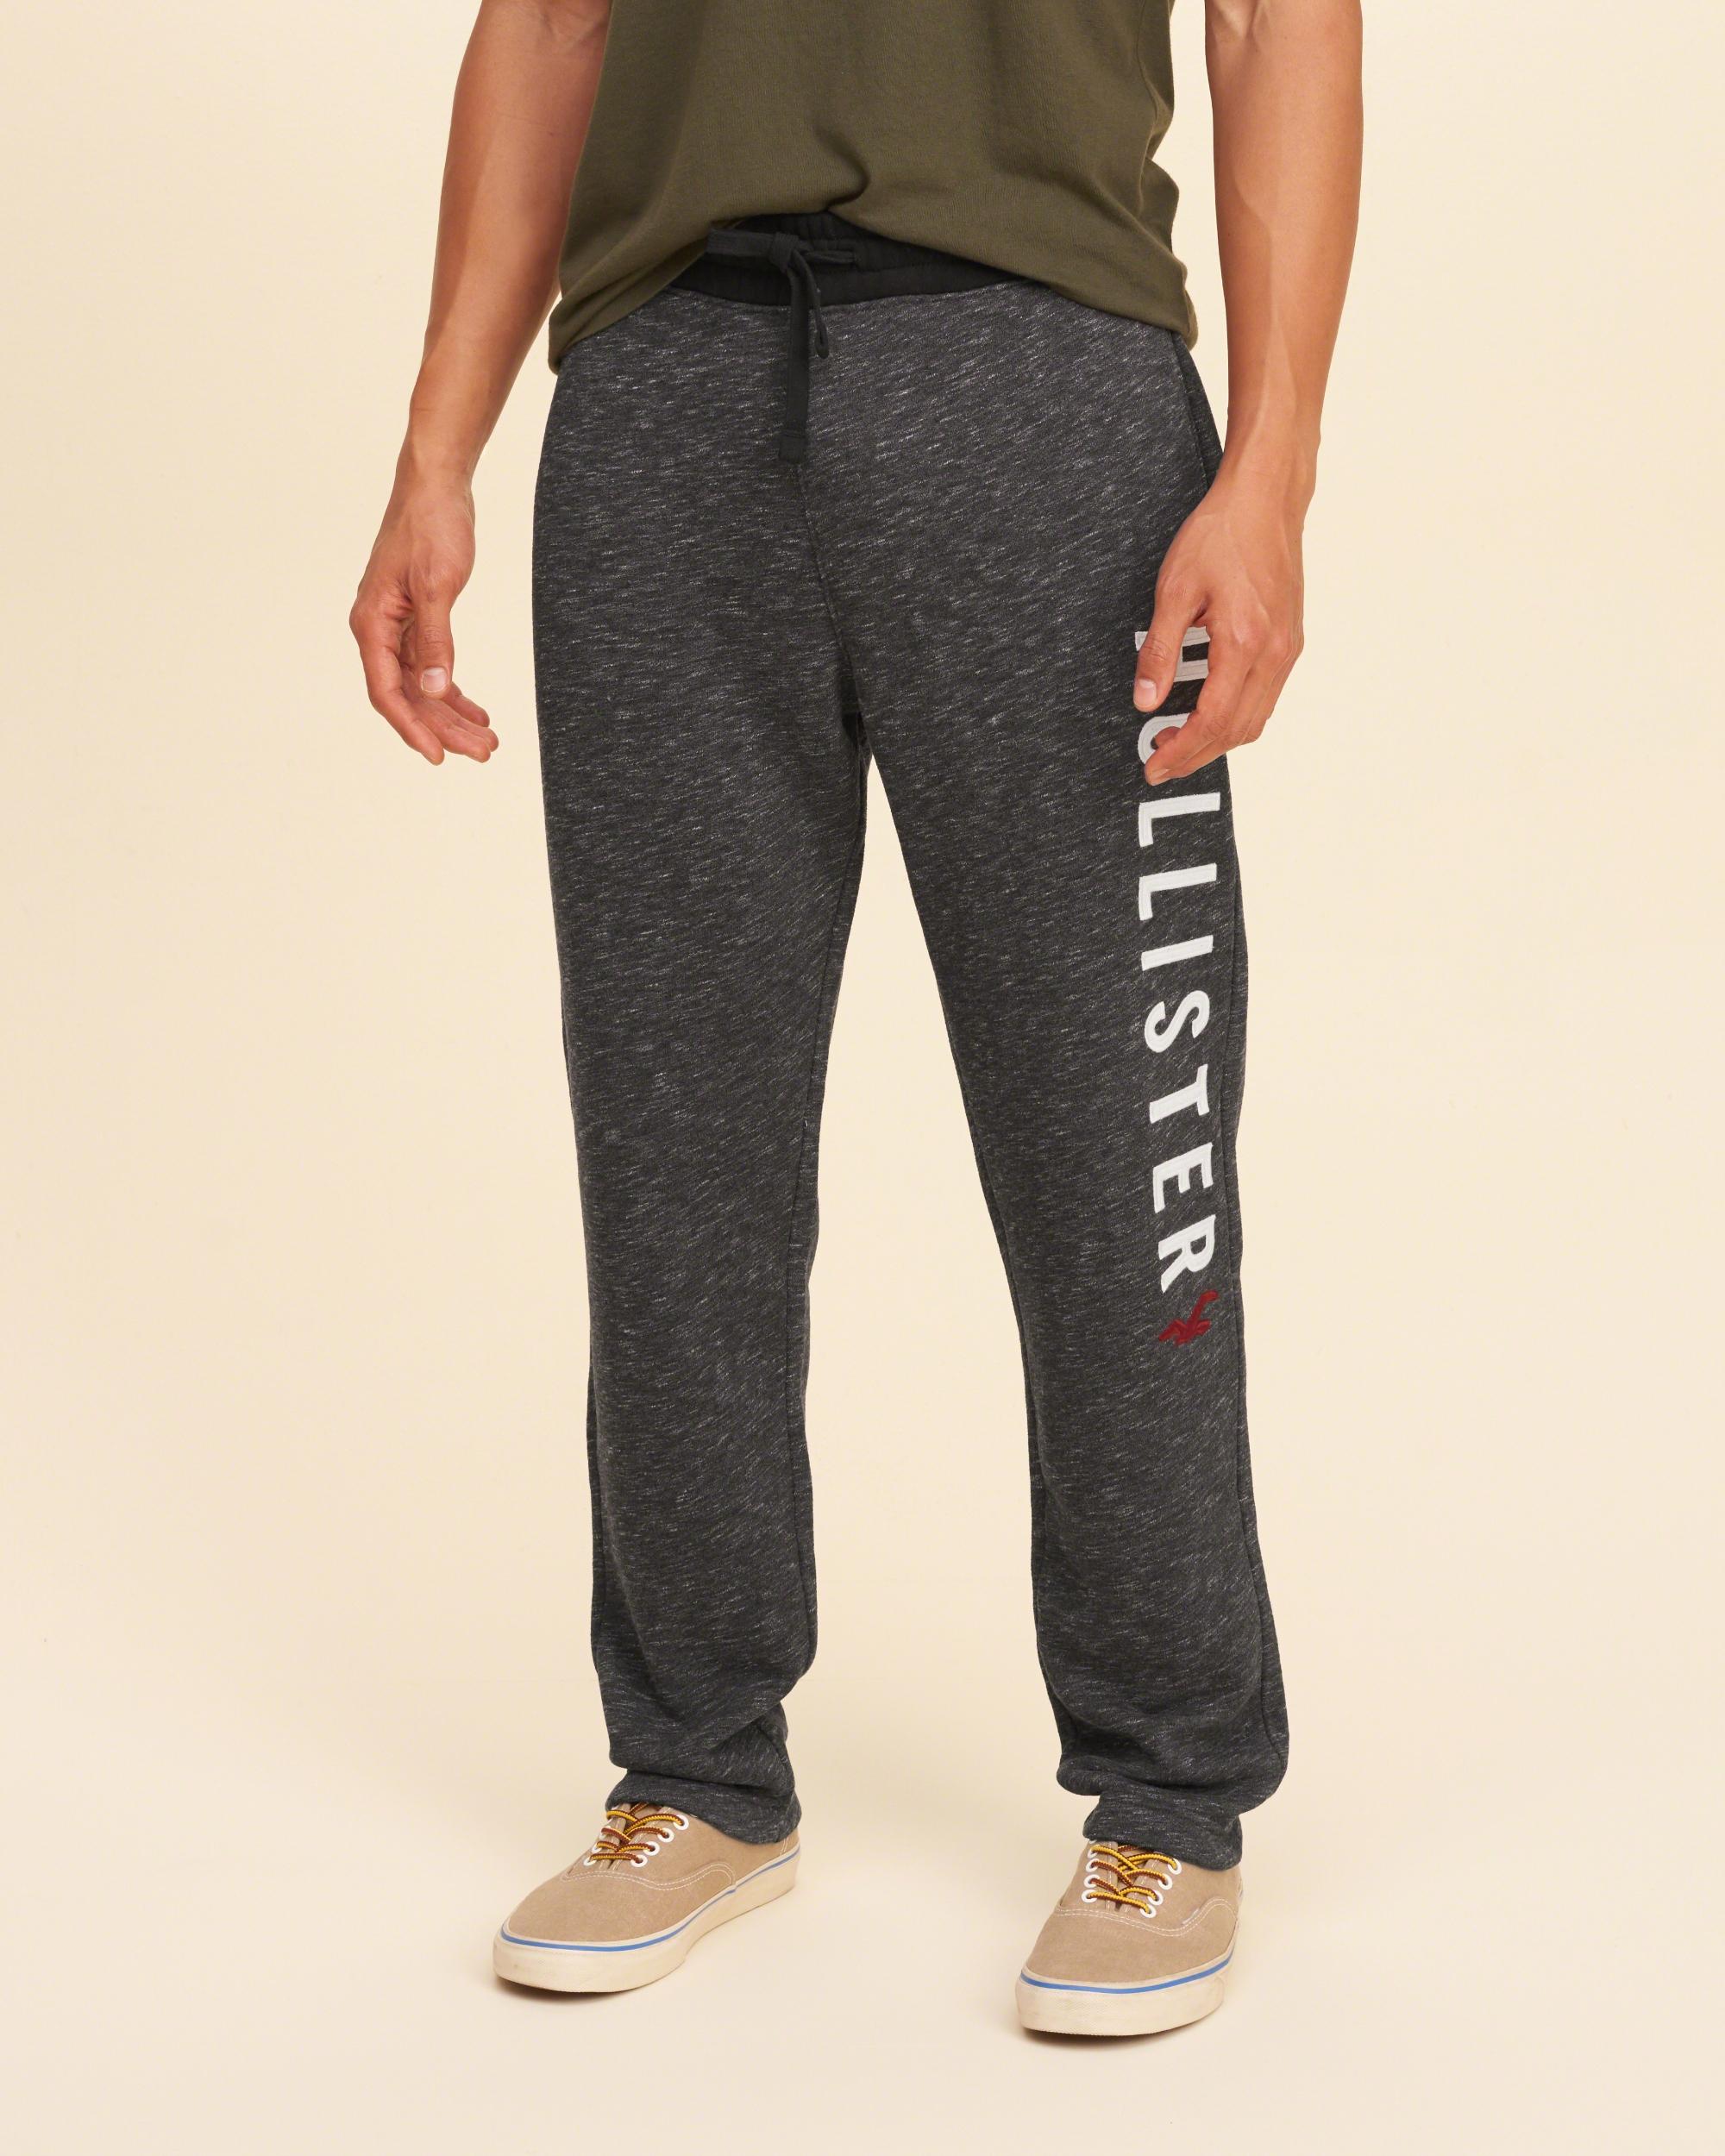 Lyst - Hollister Graphic Straight-leg Sweatpants in Gray for Men